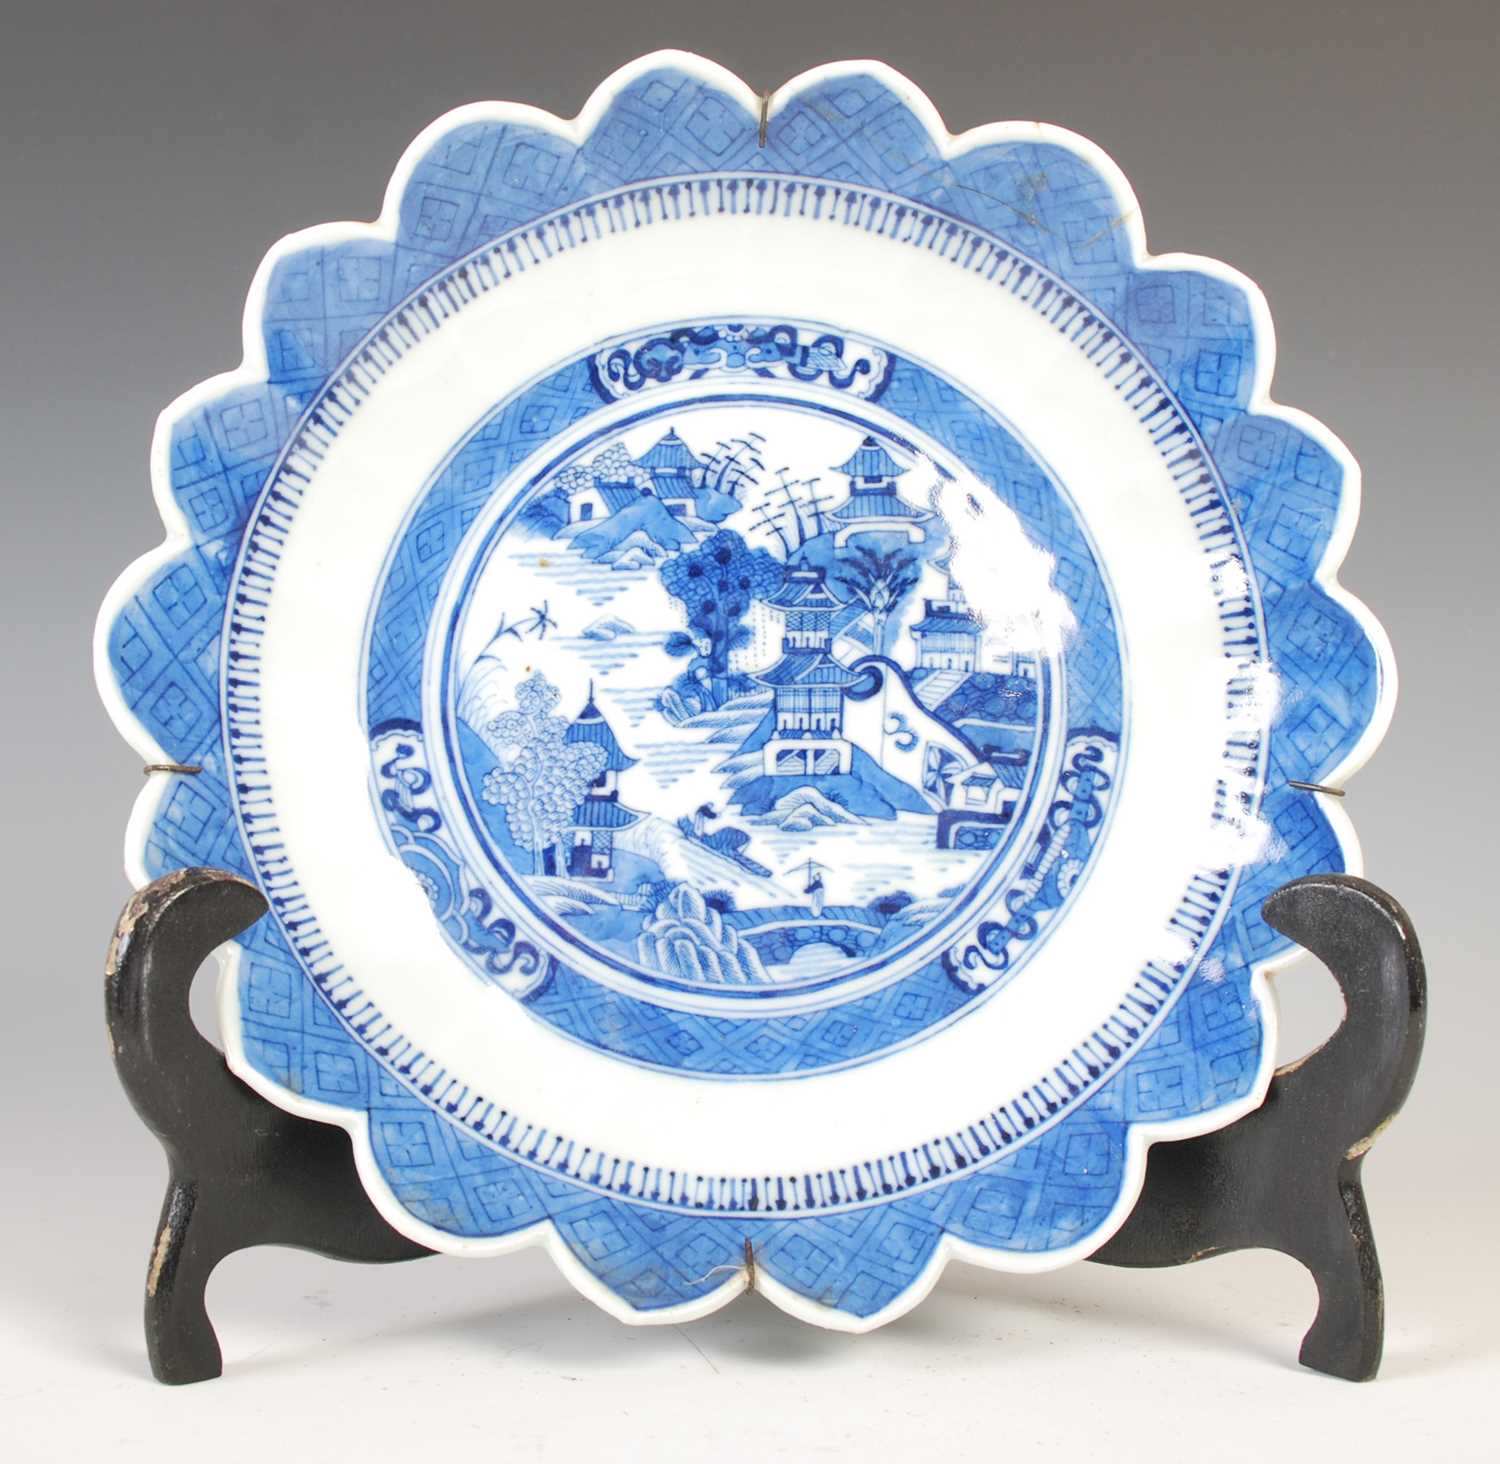 A Chinese porcelain blue and white flower shaped dish, Qing Dynasty, decorated with pavilions in a